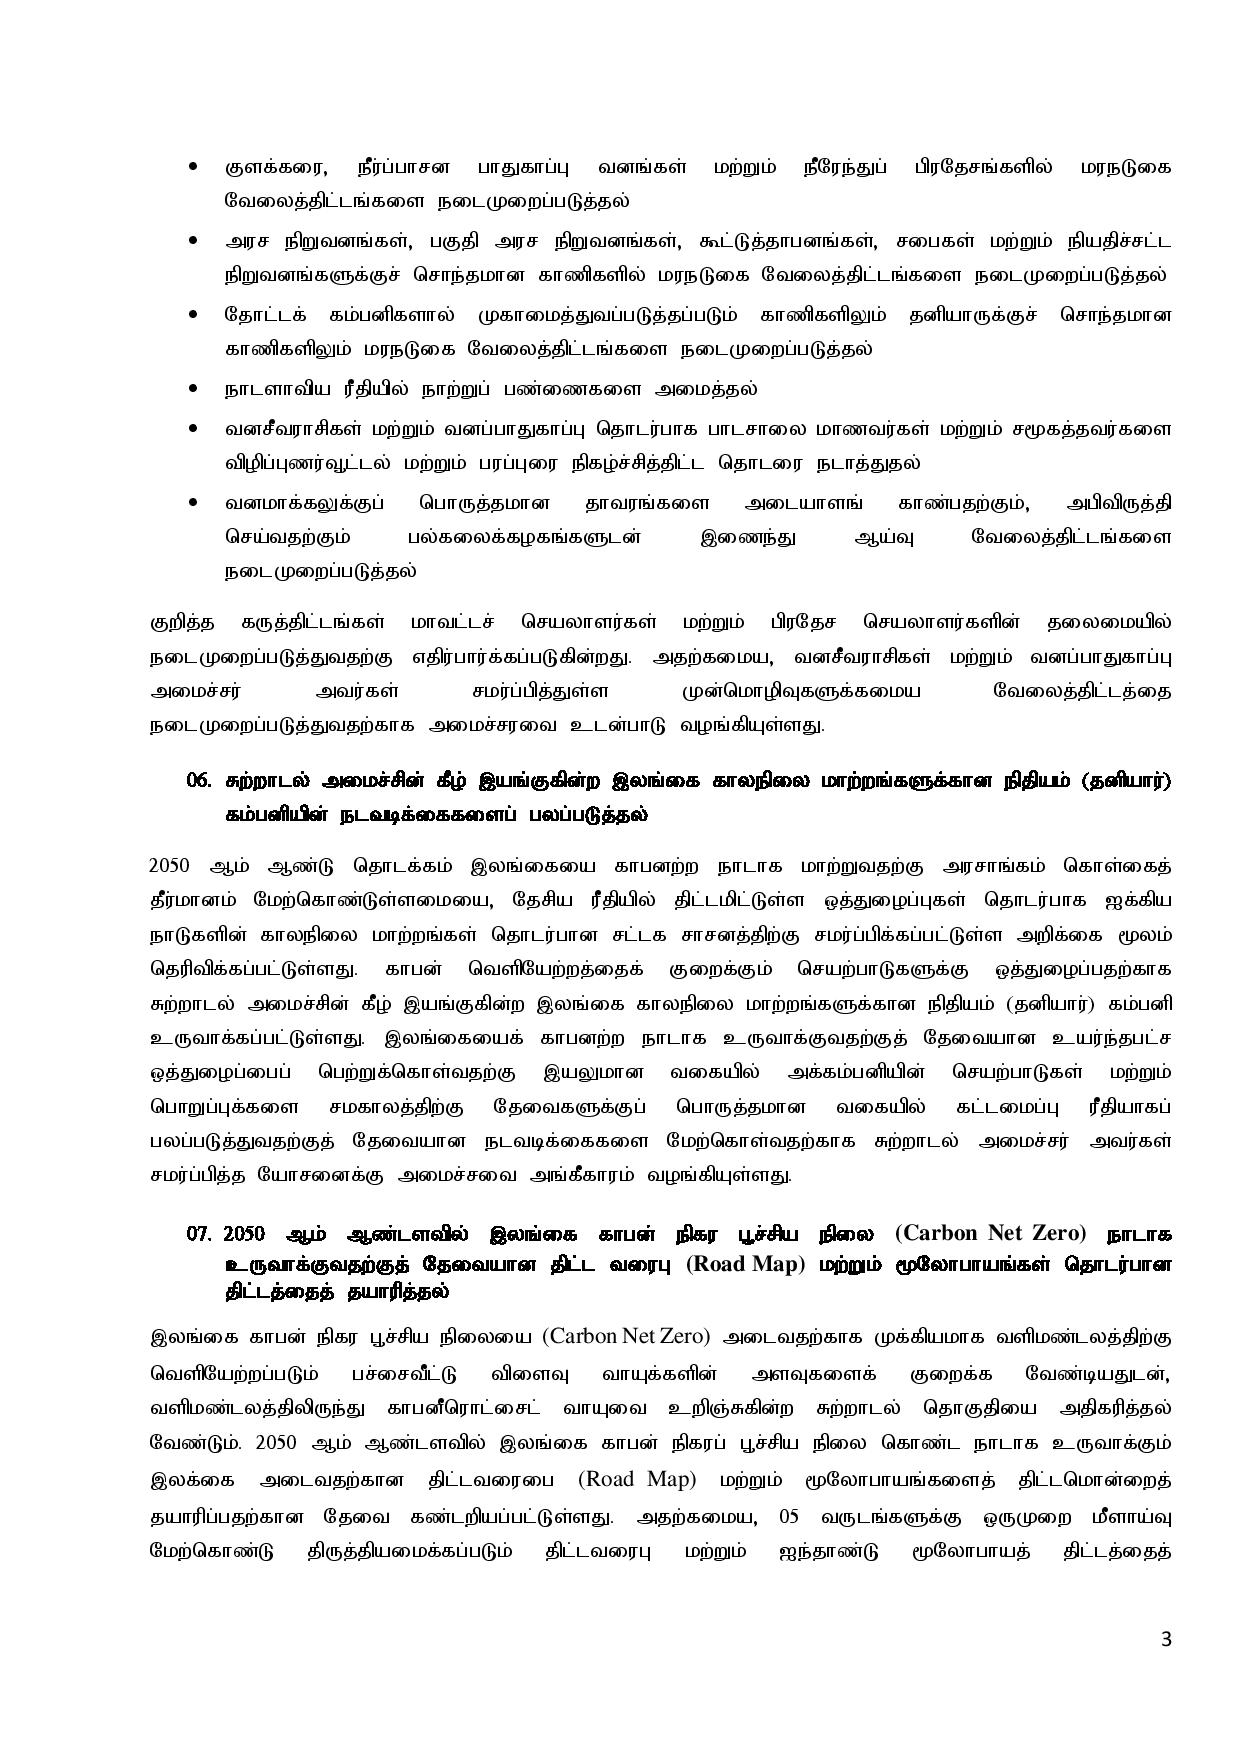 Cabinet Decisions on 14.02.2022 Tamil page 003